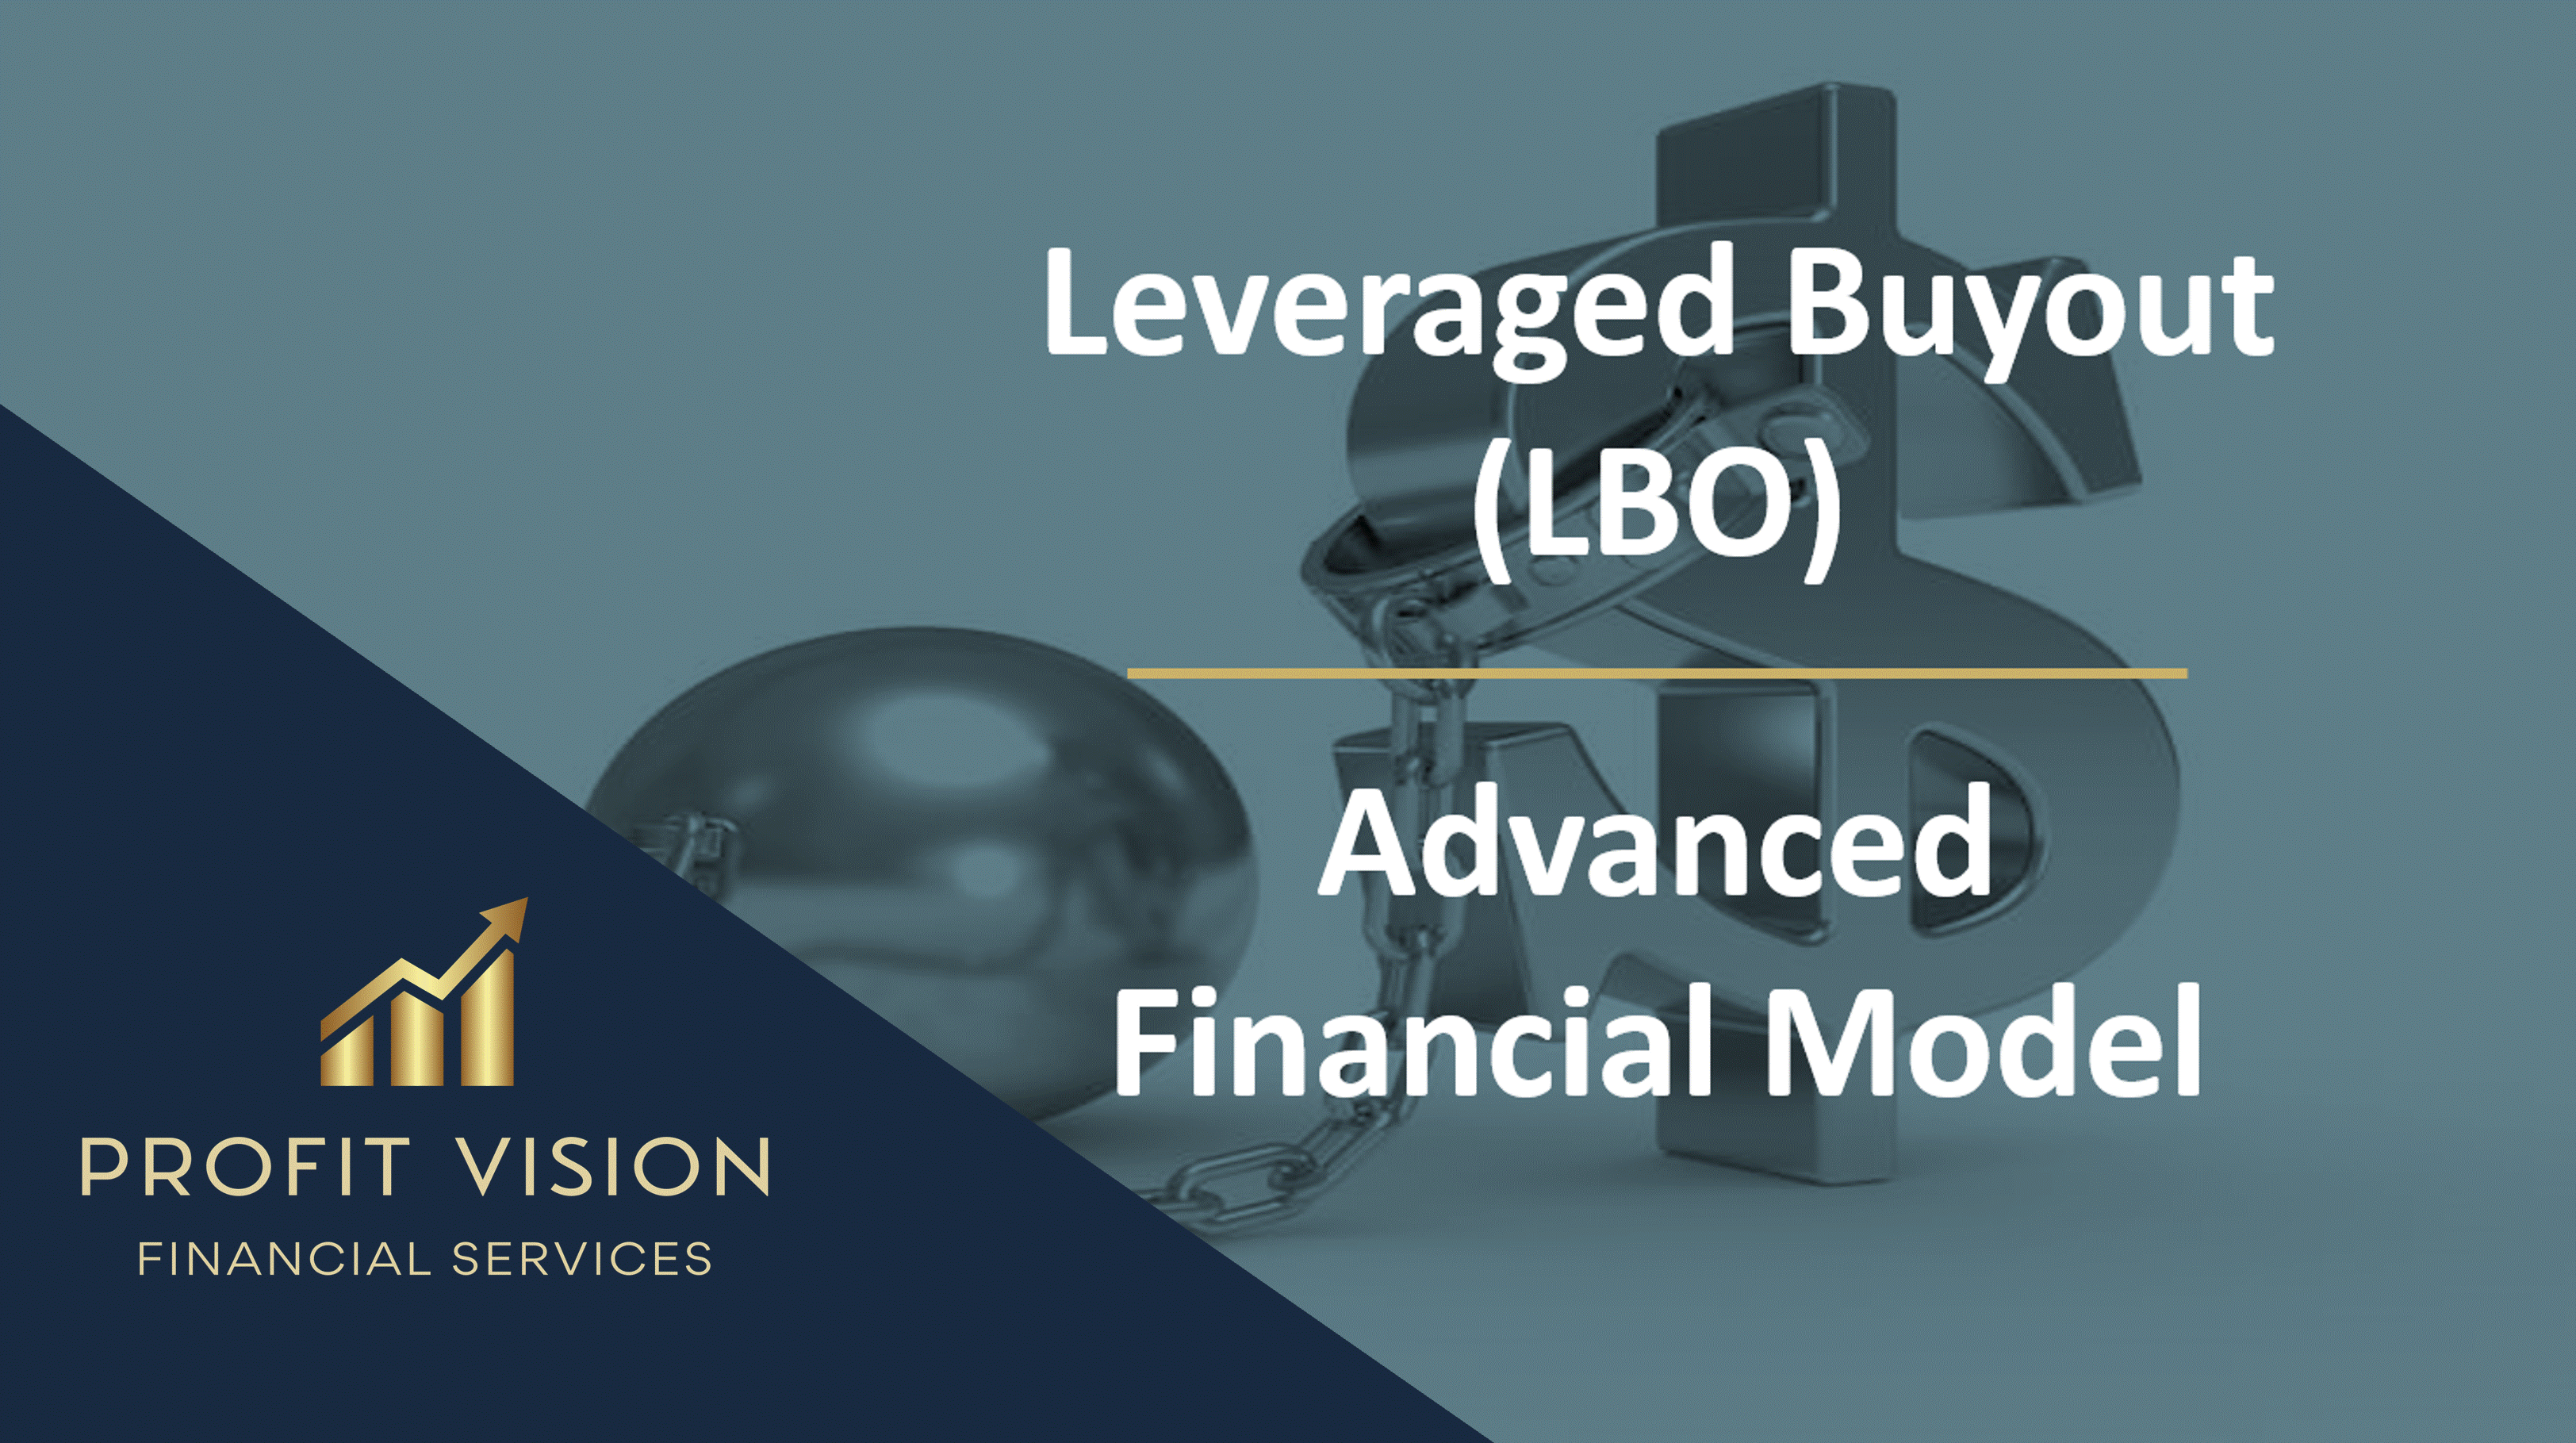 This is a partial preview of Leveraged Buyout (LBO) Financial Model (Excel workbook (XLSX)). 